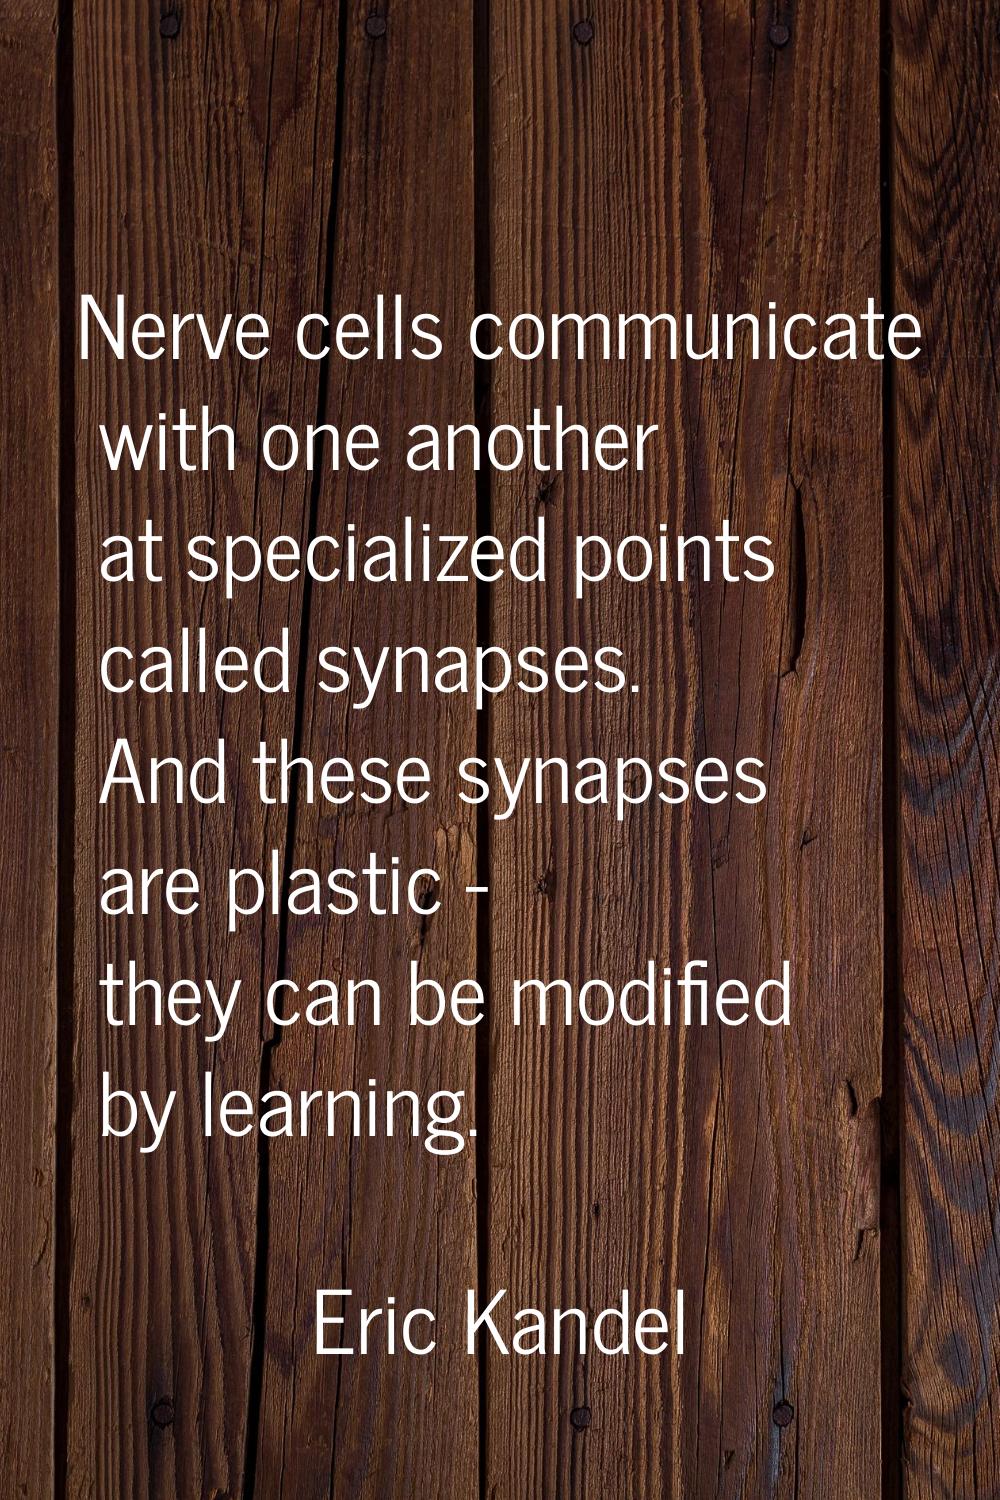 Nerve cells communicate with one another at specialized points called synapses. And these synapses 